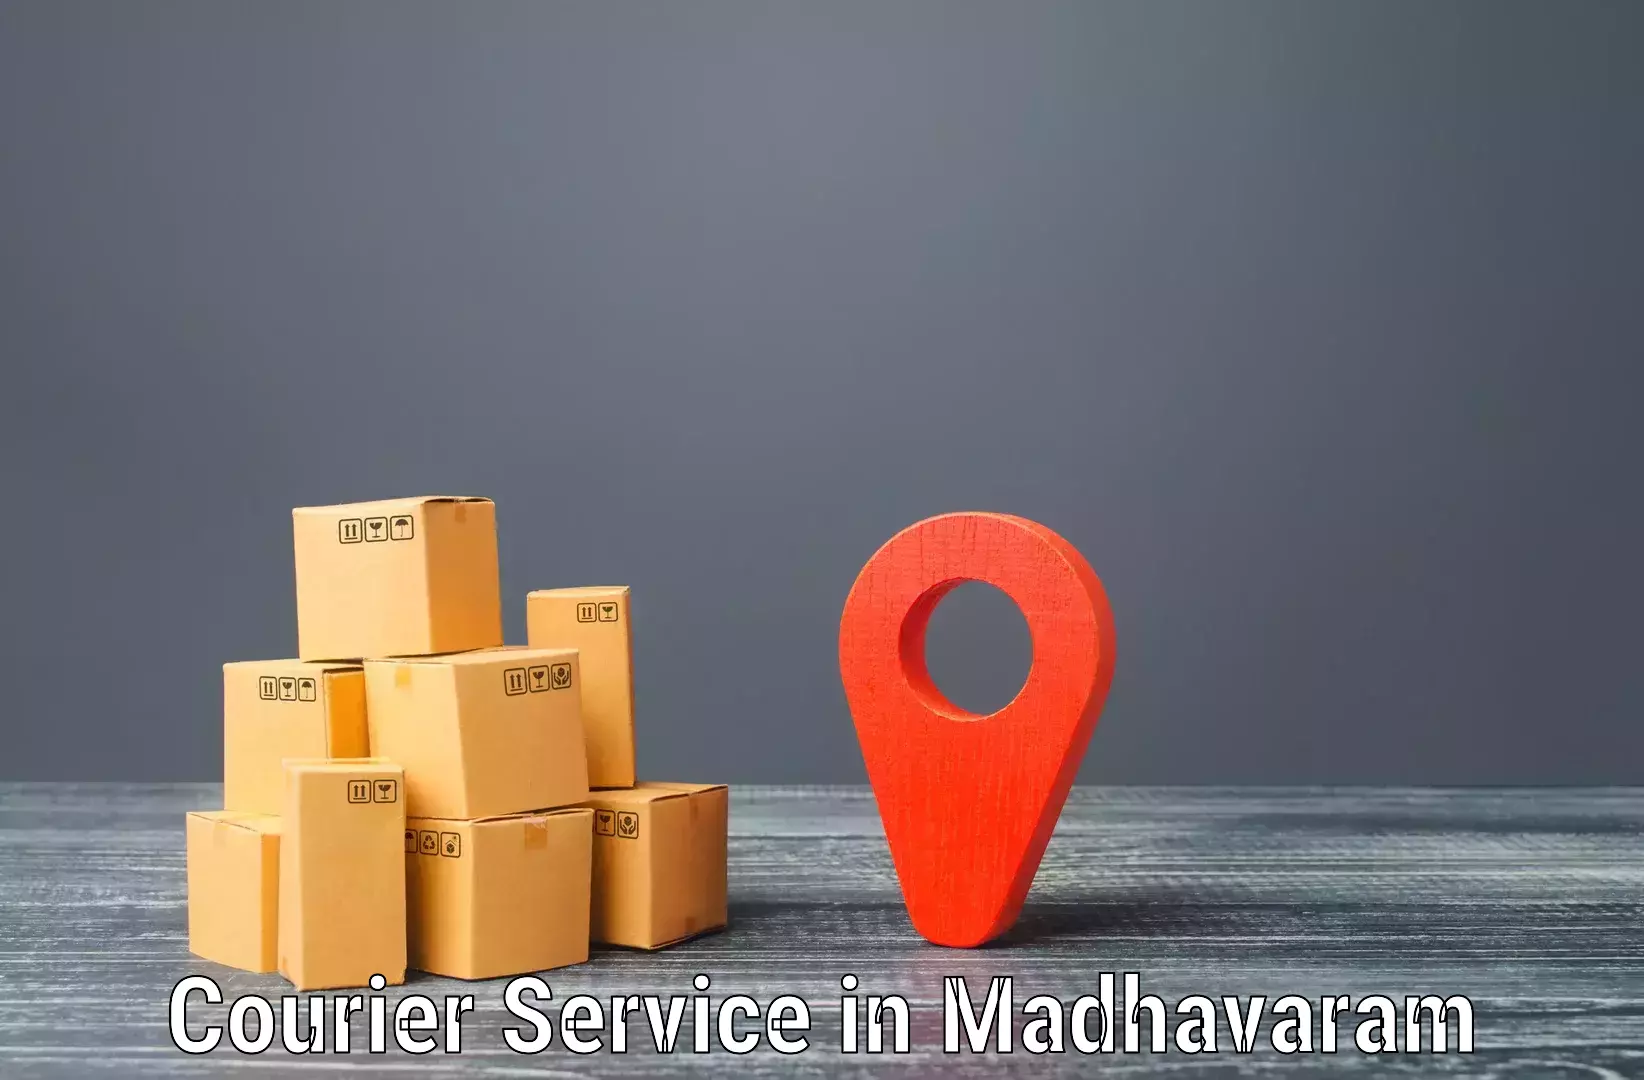 Sustainable delivery practices in Madhavaram